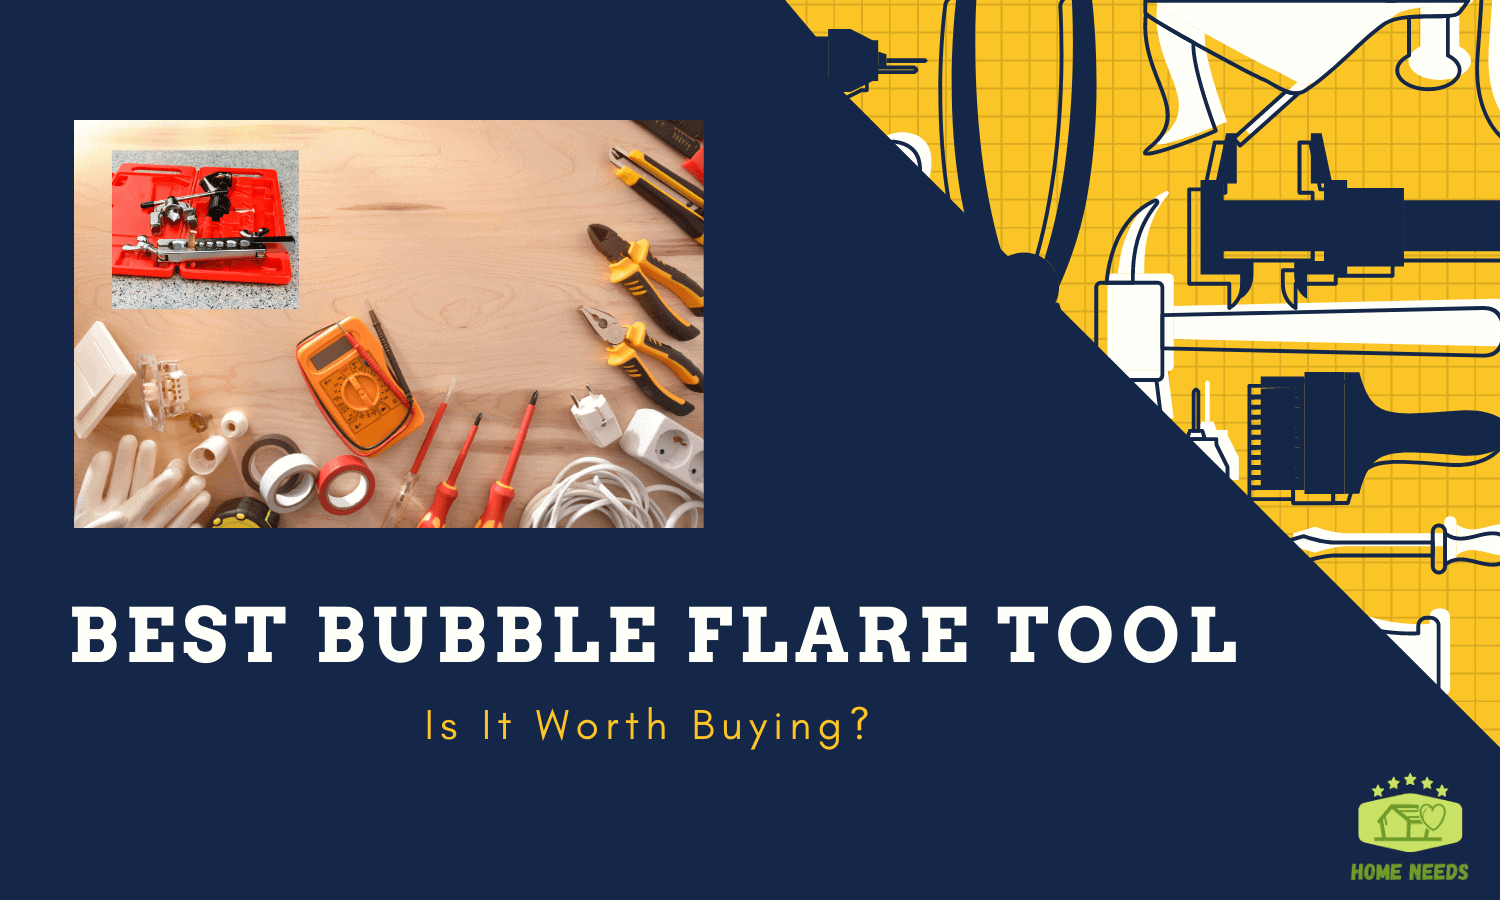 Best Bubble Flare Tool